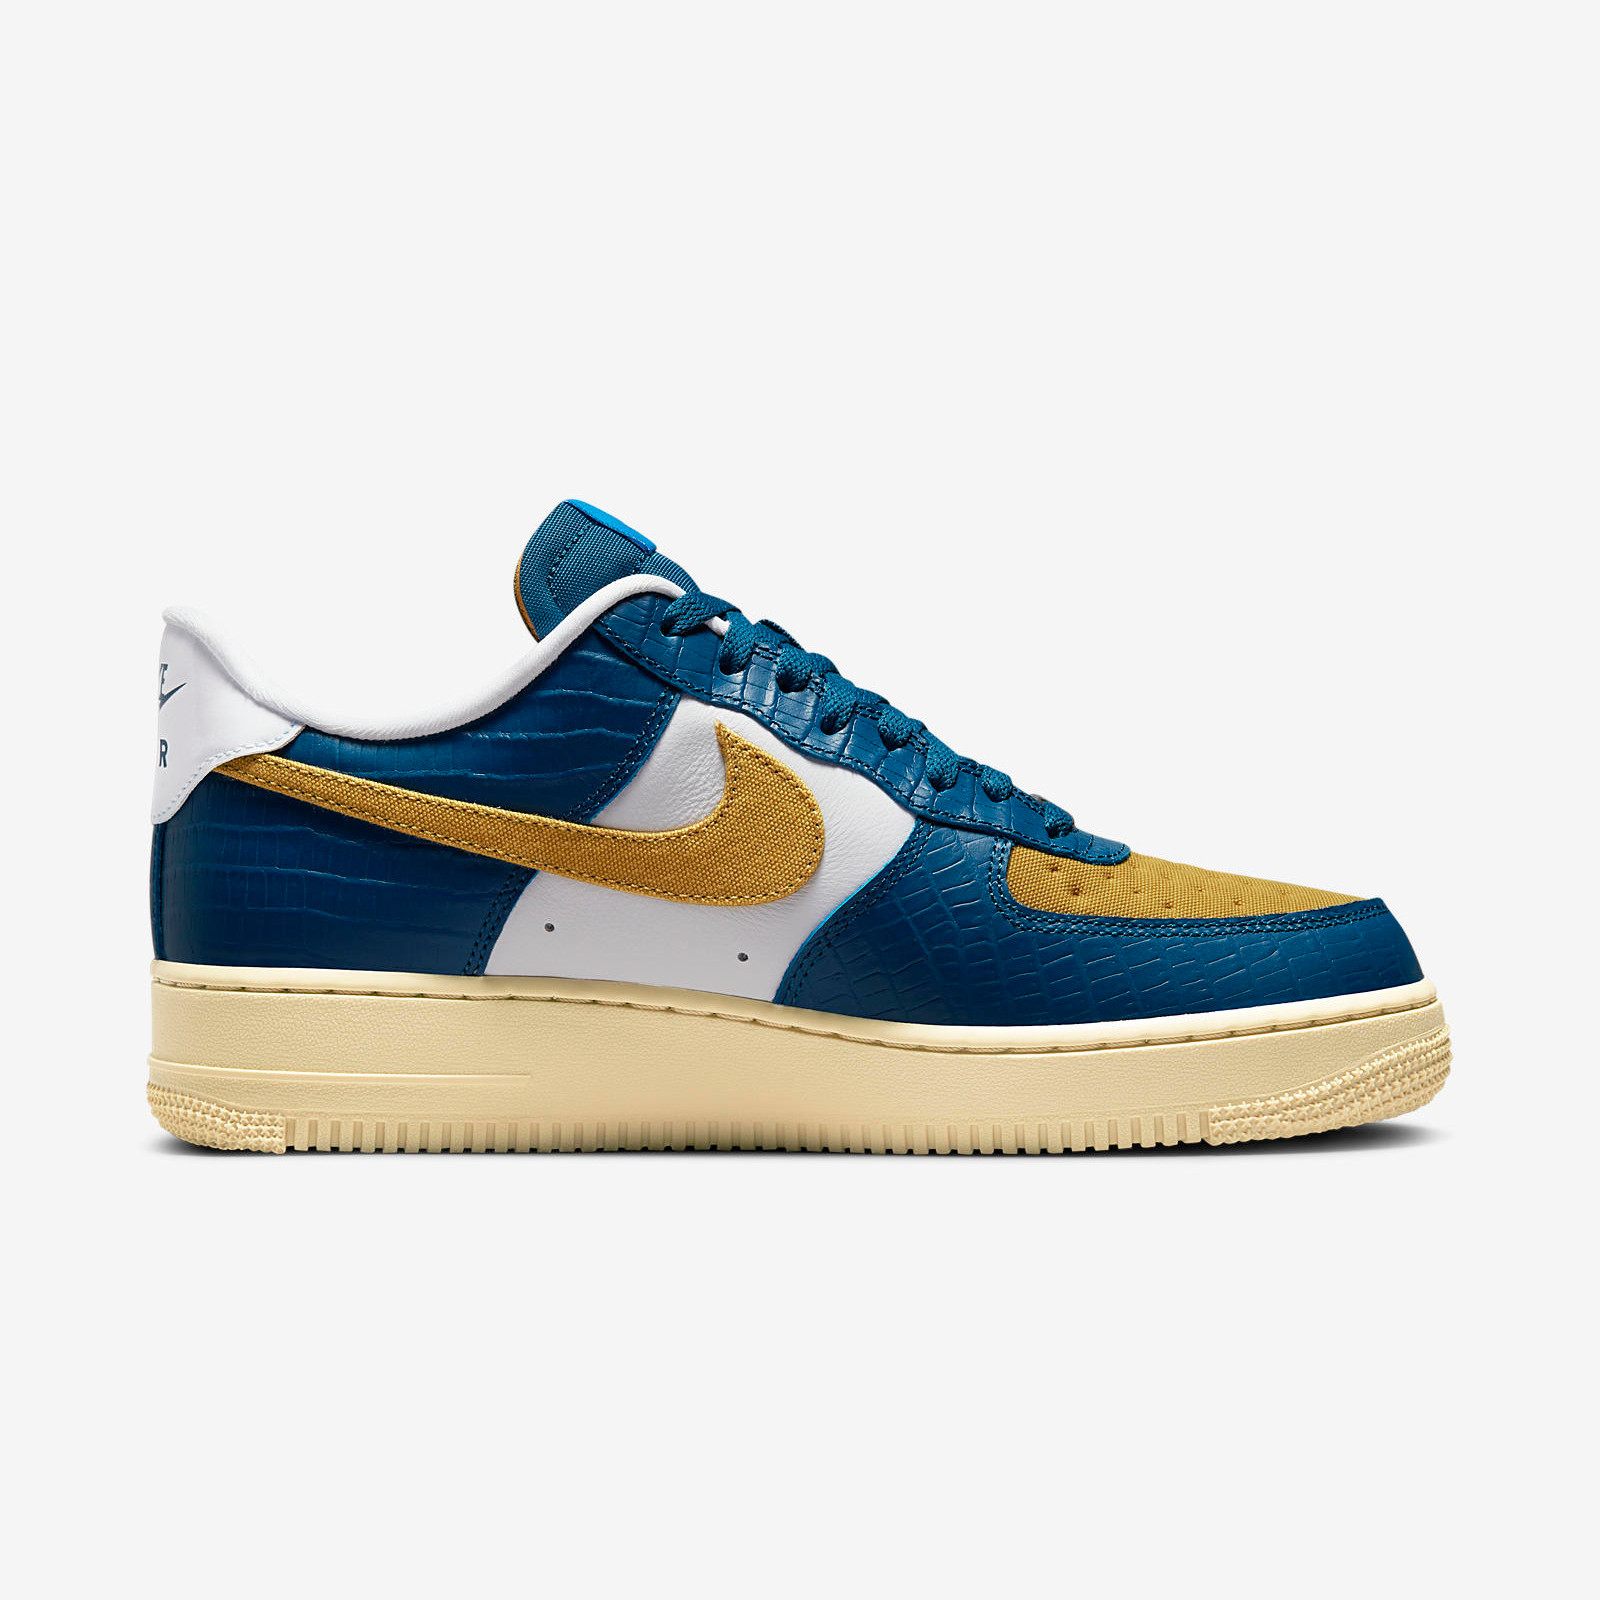 Undefeated x Nike
Air Force 1 Low
Blue / White / Goldtone